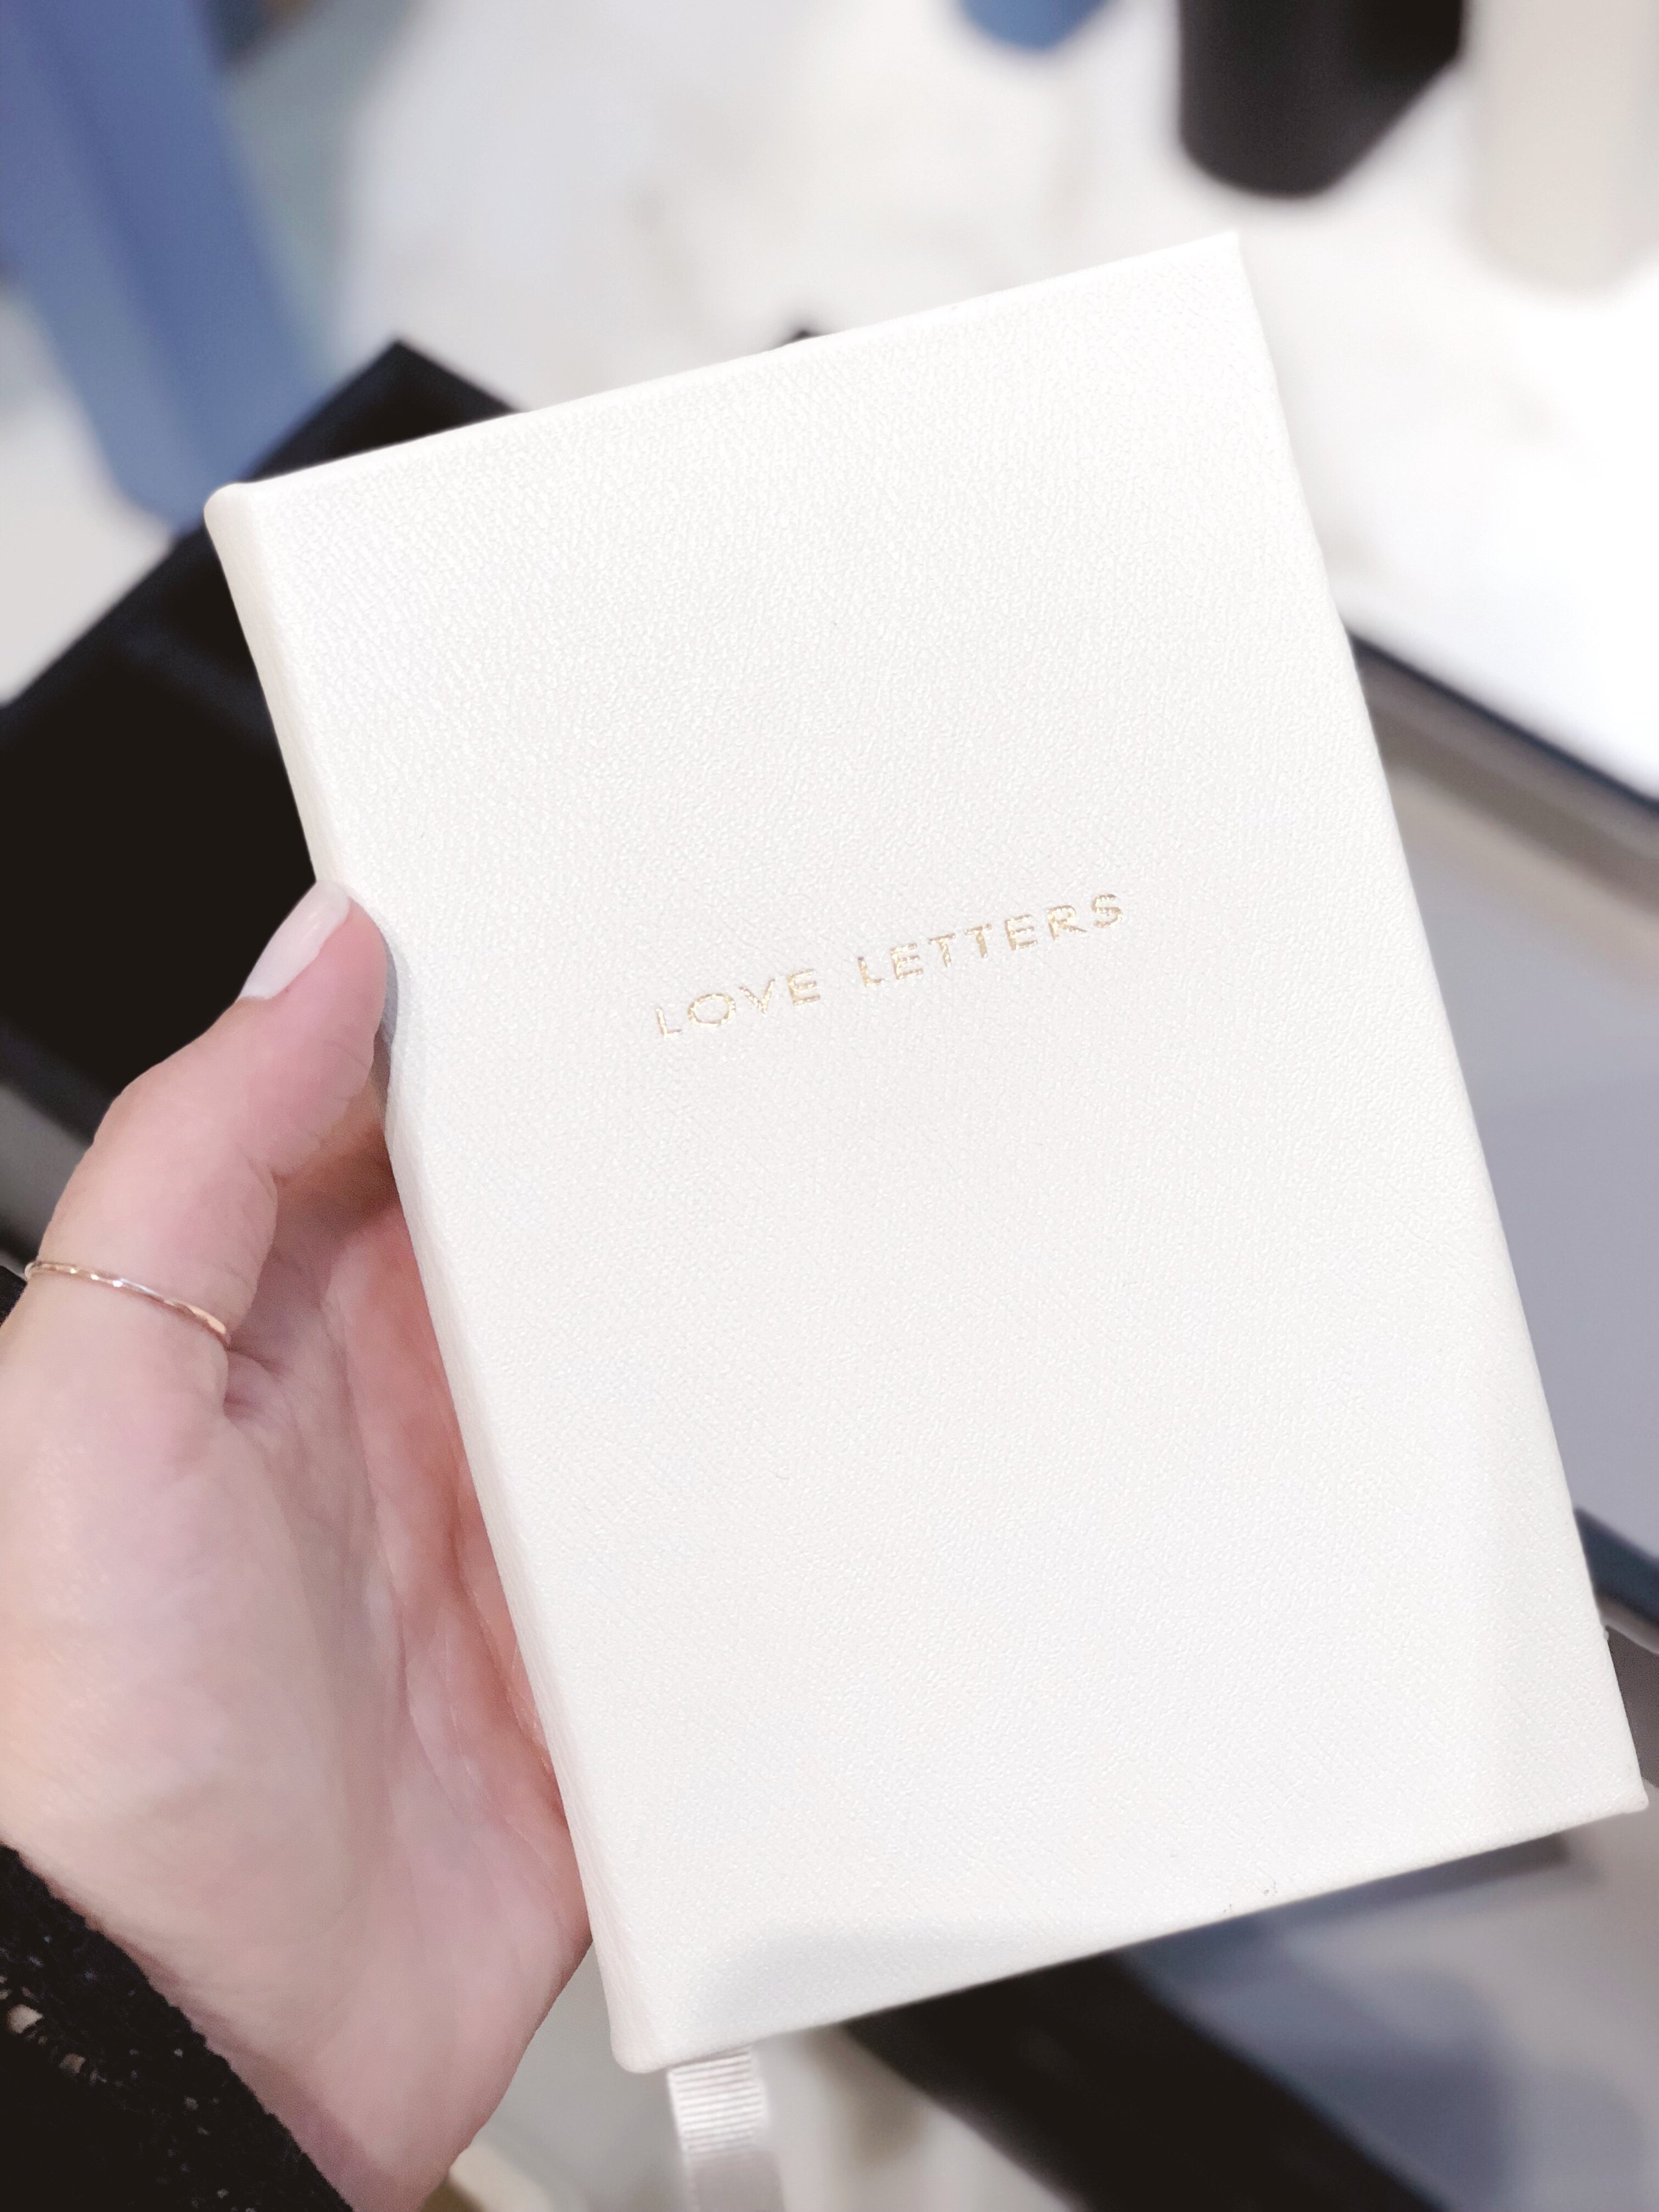  Love letters, by Smythson 